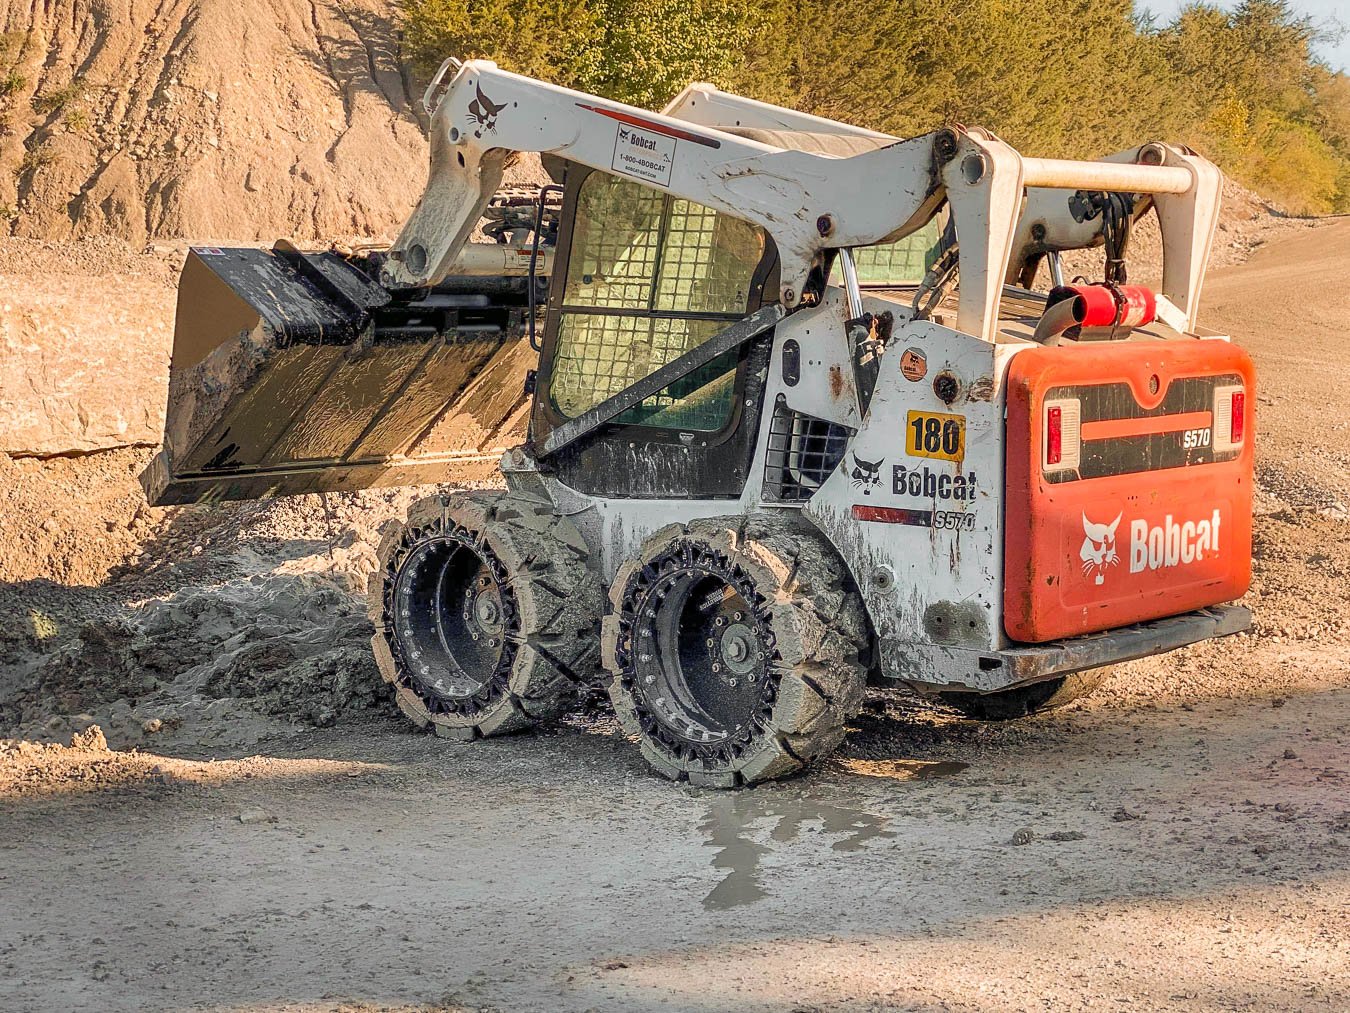 This image shows a BOBCAT S570 with our 14x17.5 Solid Skid Steer Tires the EWRS-HS